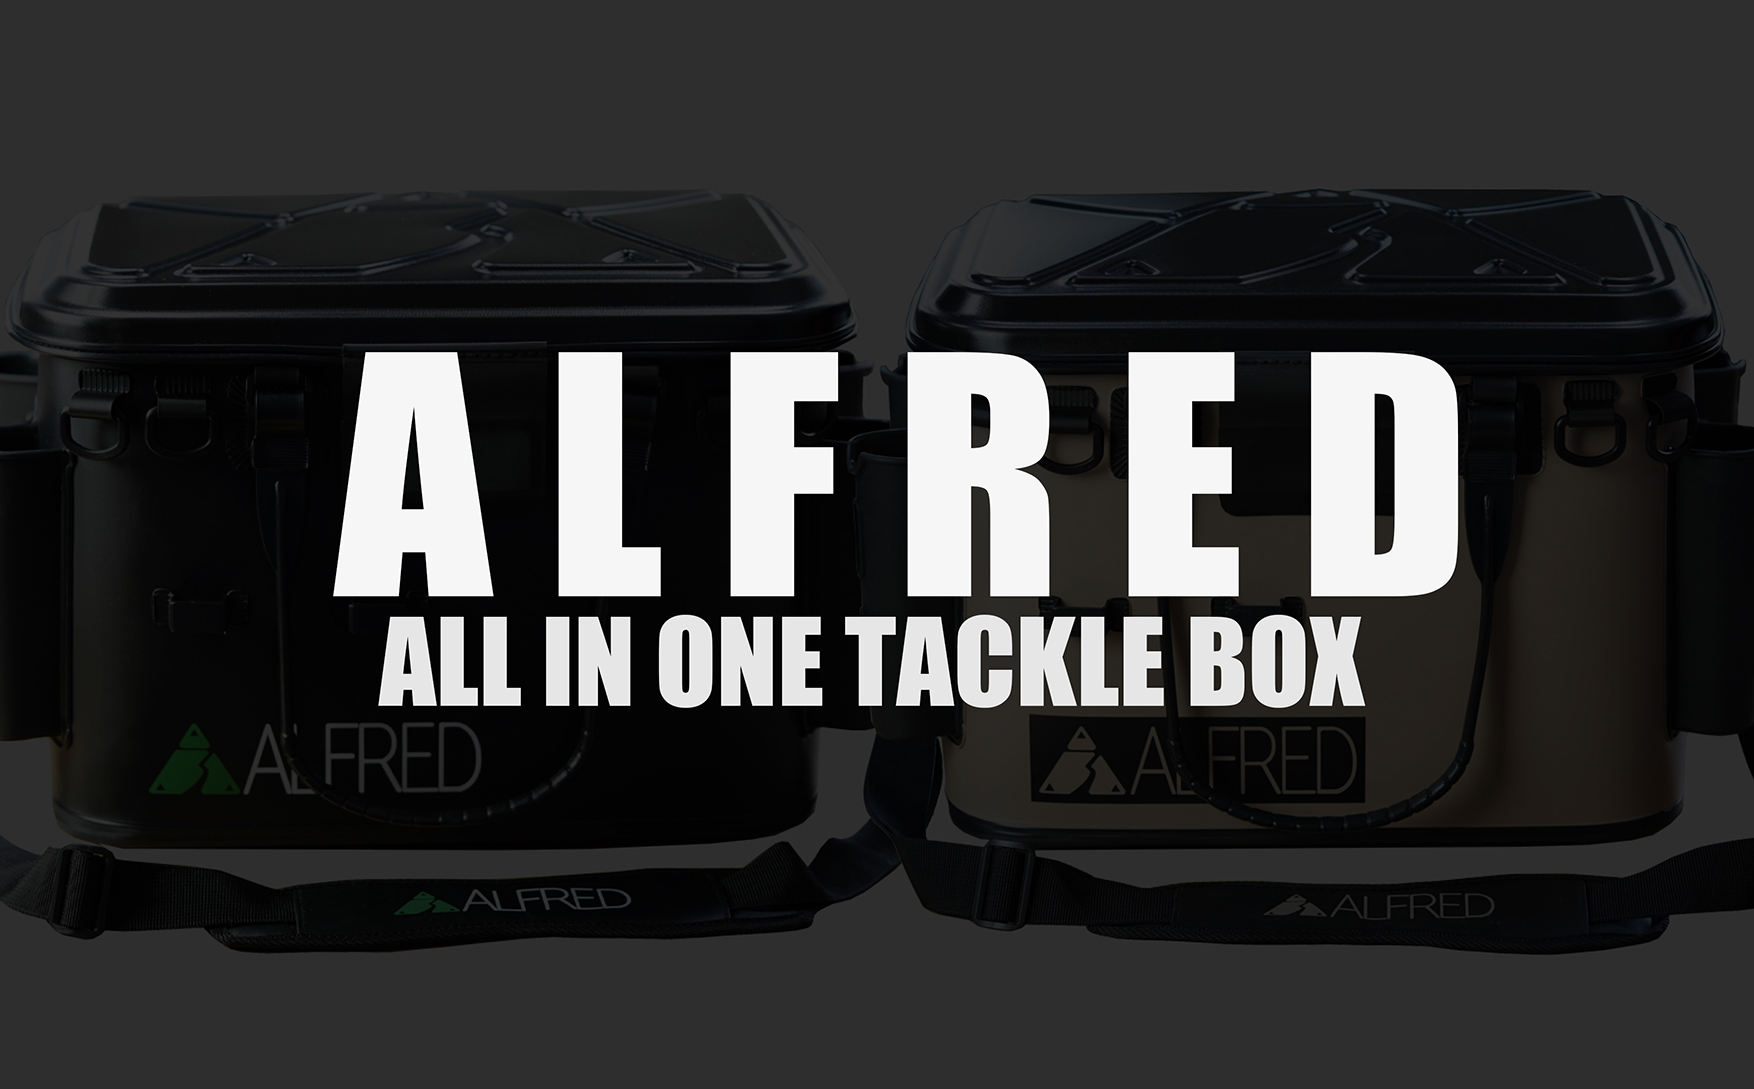 ALFRED ALL IN ONE TACKLE BOX | アルフレッド/ALFRED